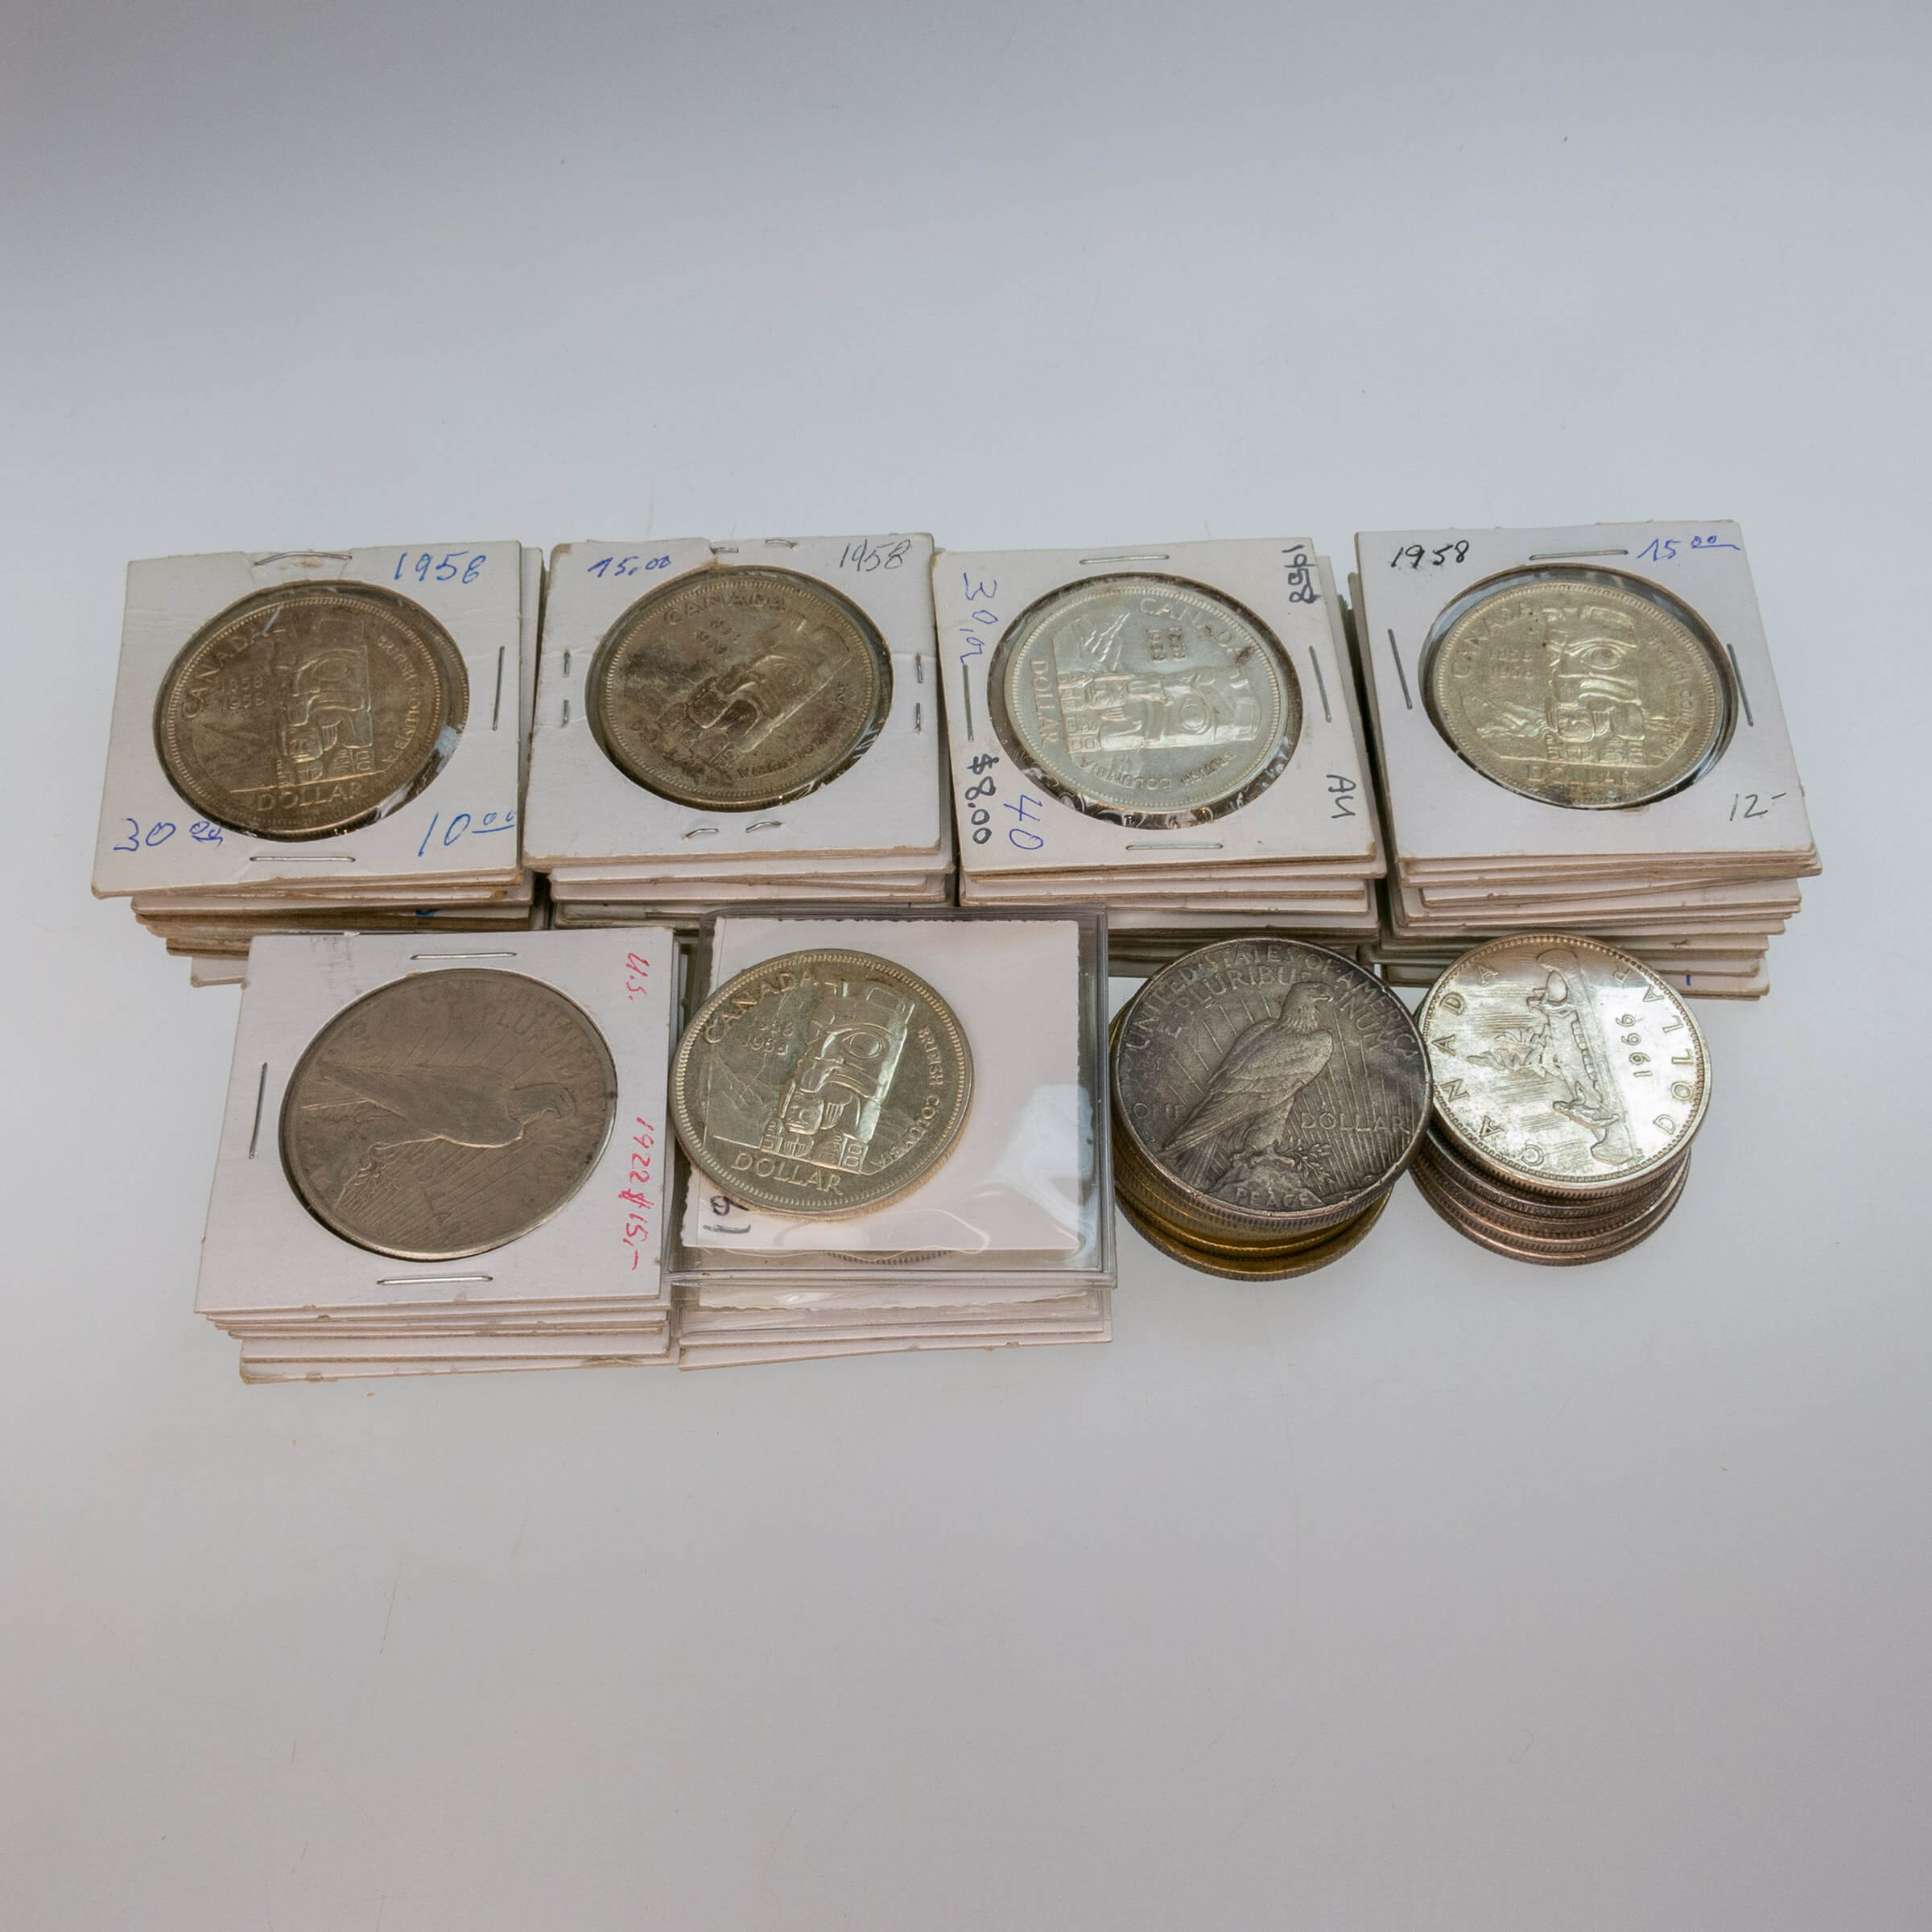 Quantity Of Canadian And American Coins